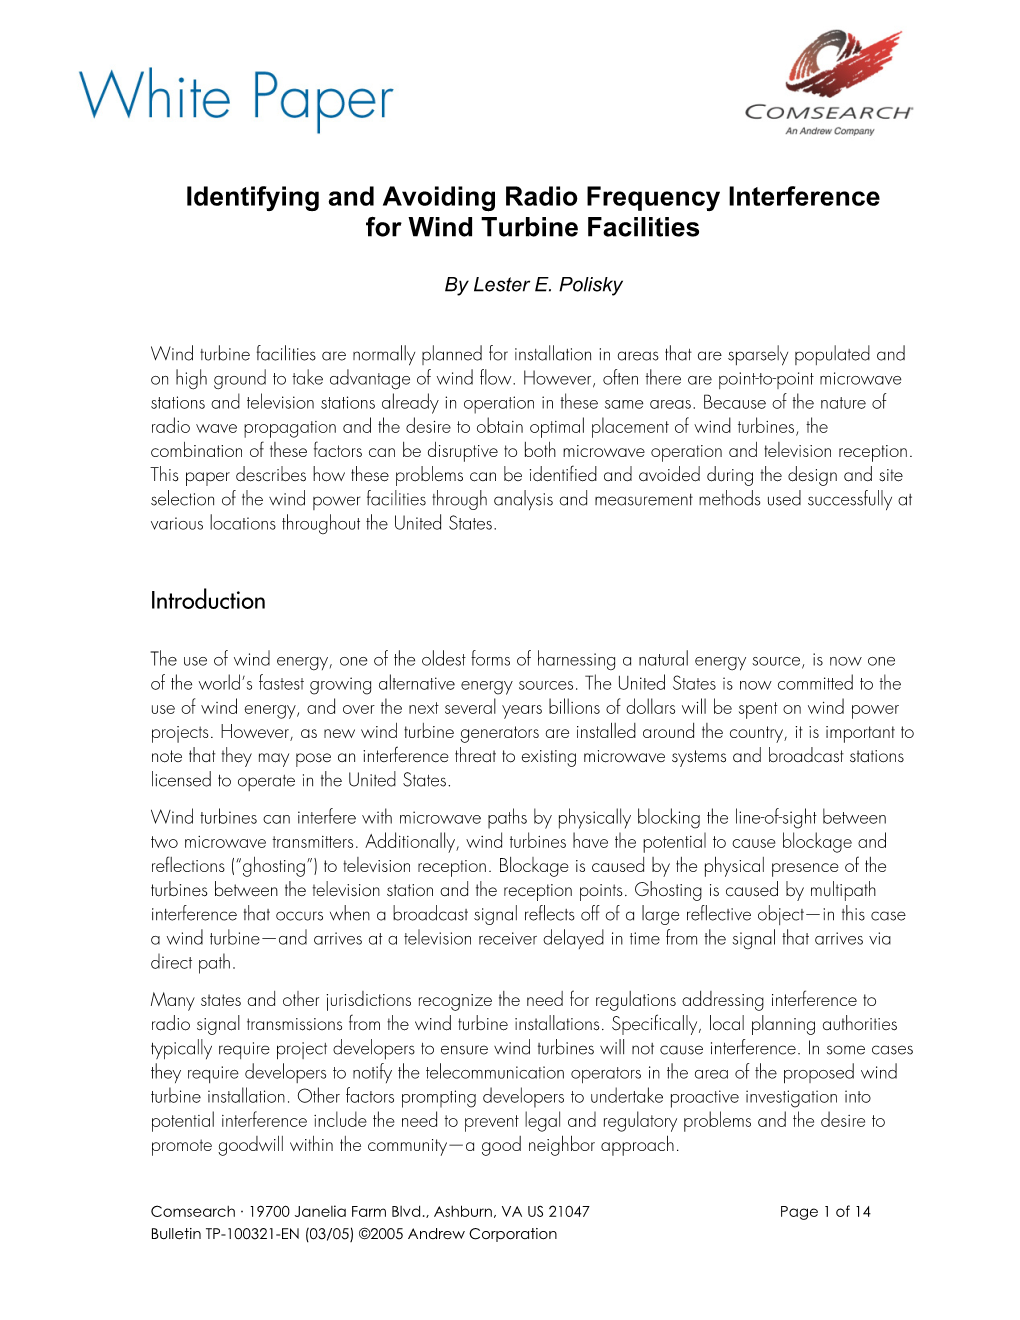 Identifying and Avoiding Radio Frequency Interference for Wind Turbine Facilities